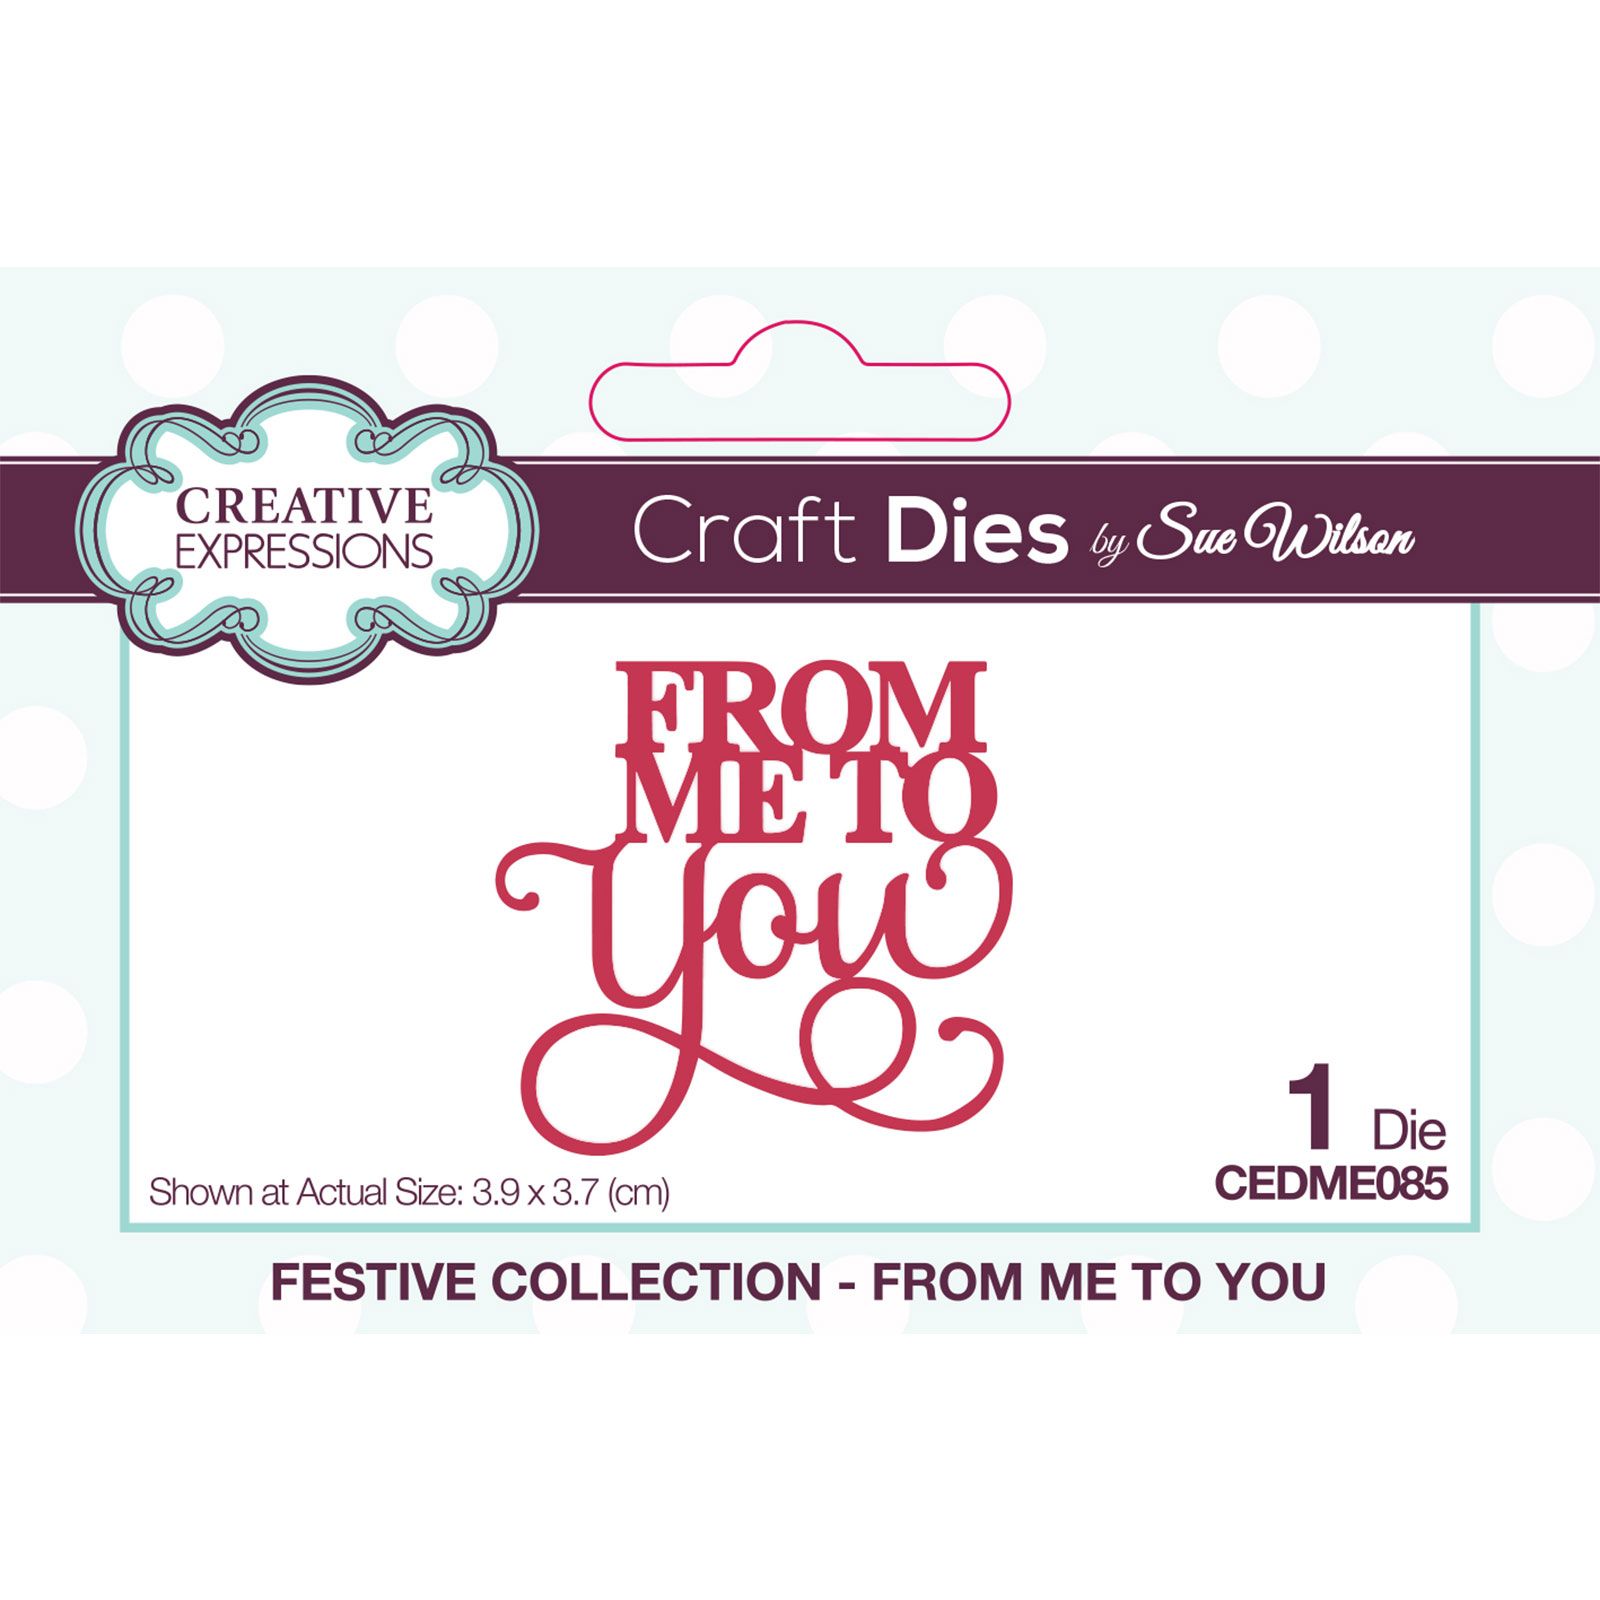 Creative Expressions • Mini expressions craft die From me to you